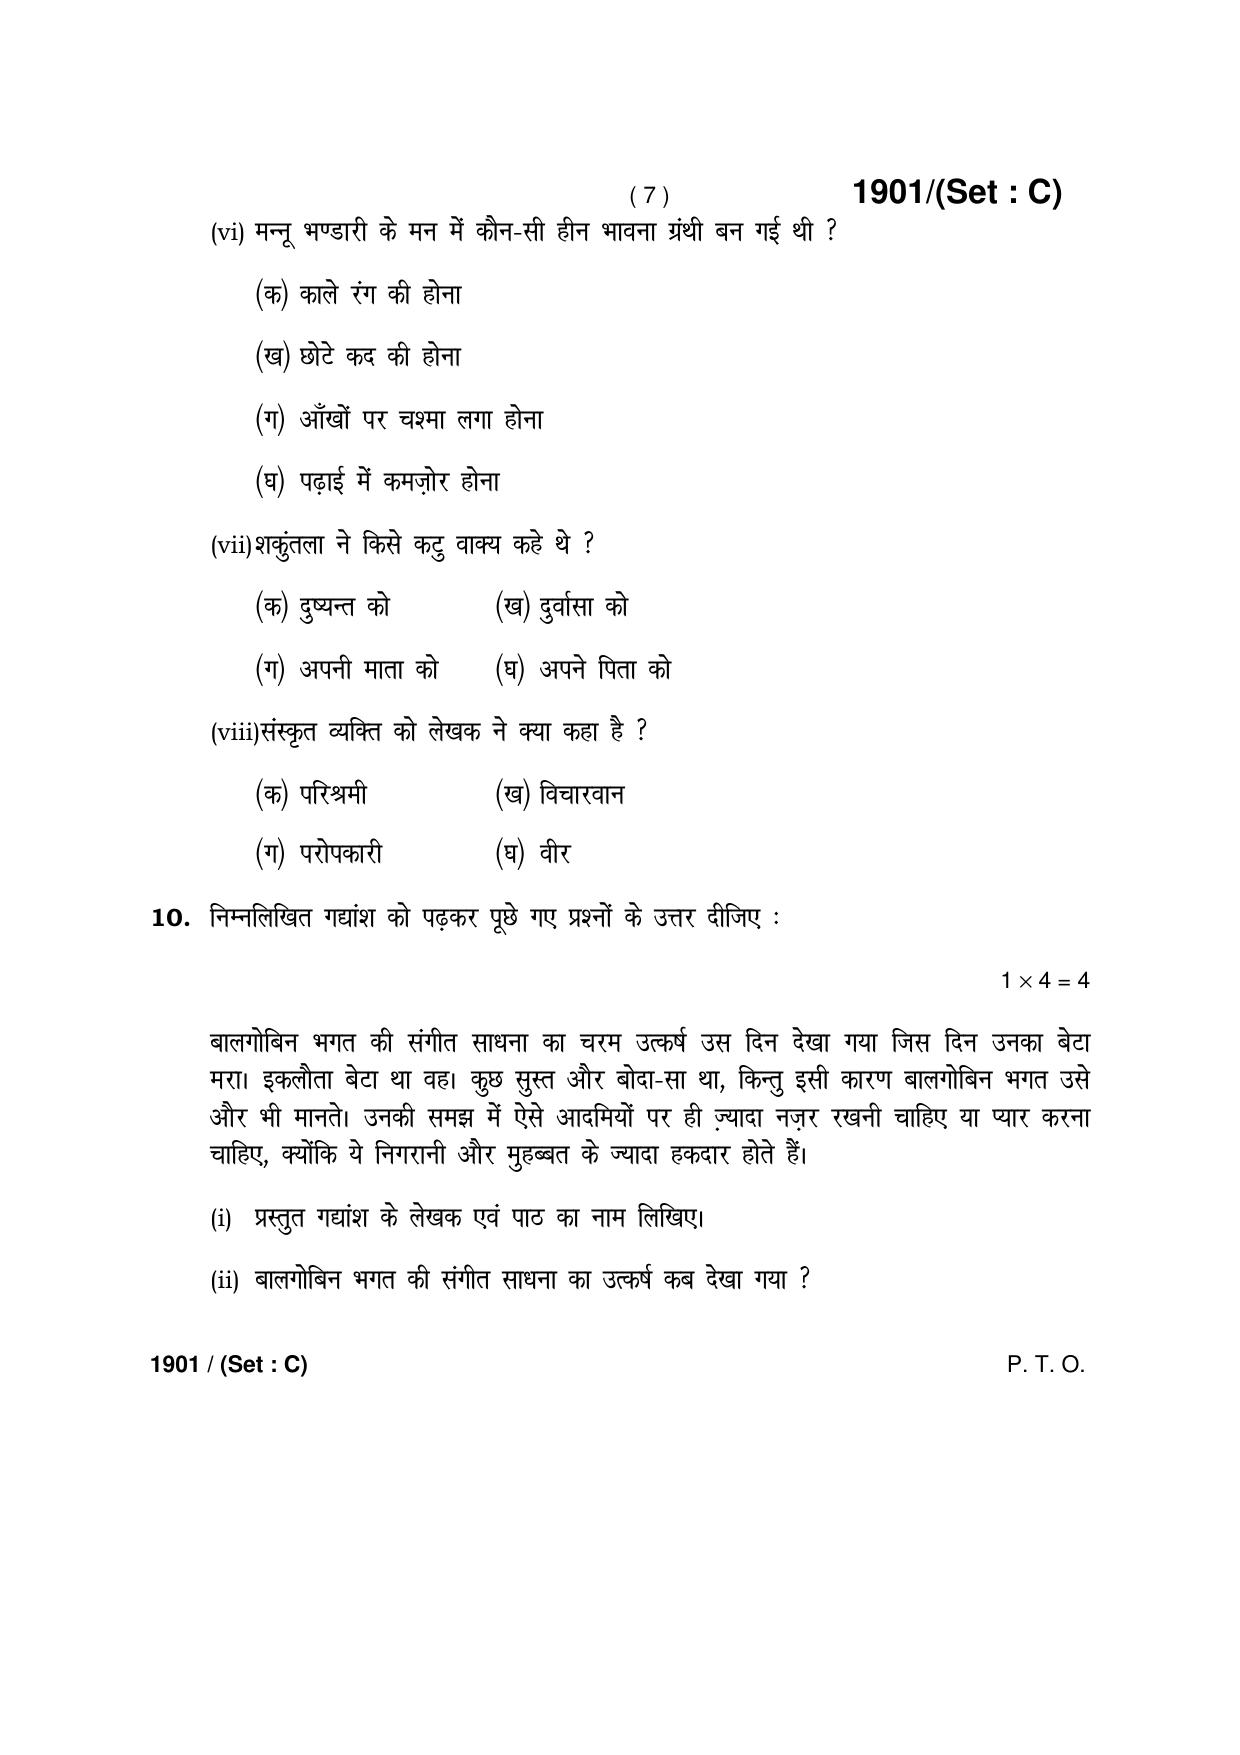 Haryana Board HBSE Class 10 Hindi -C 2017 Question Paper - Page 7